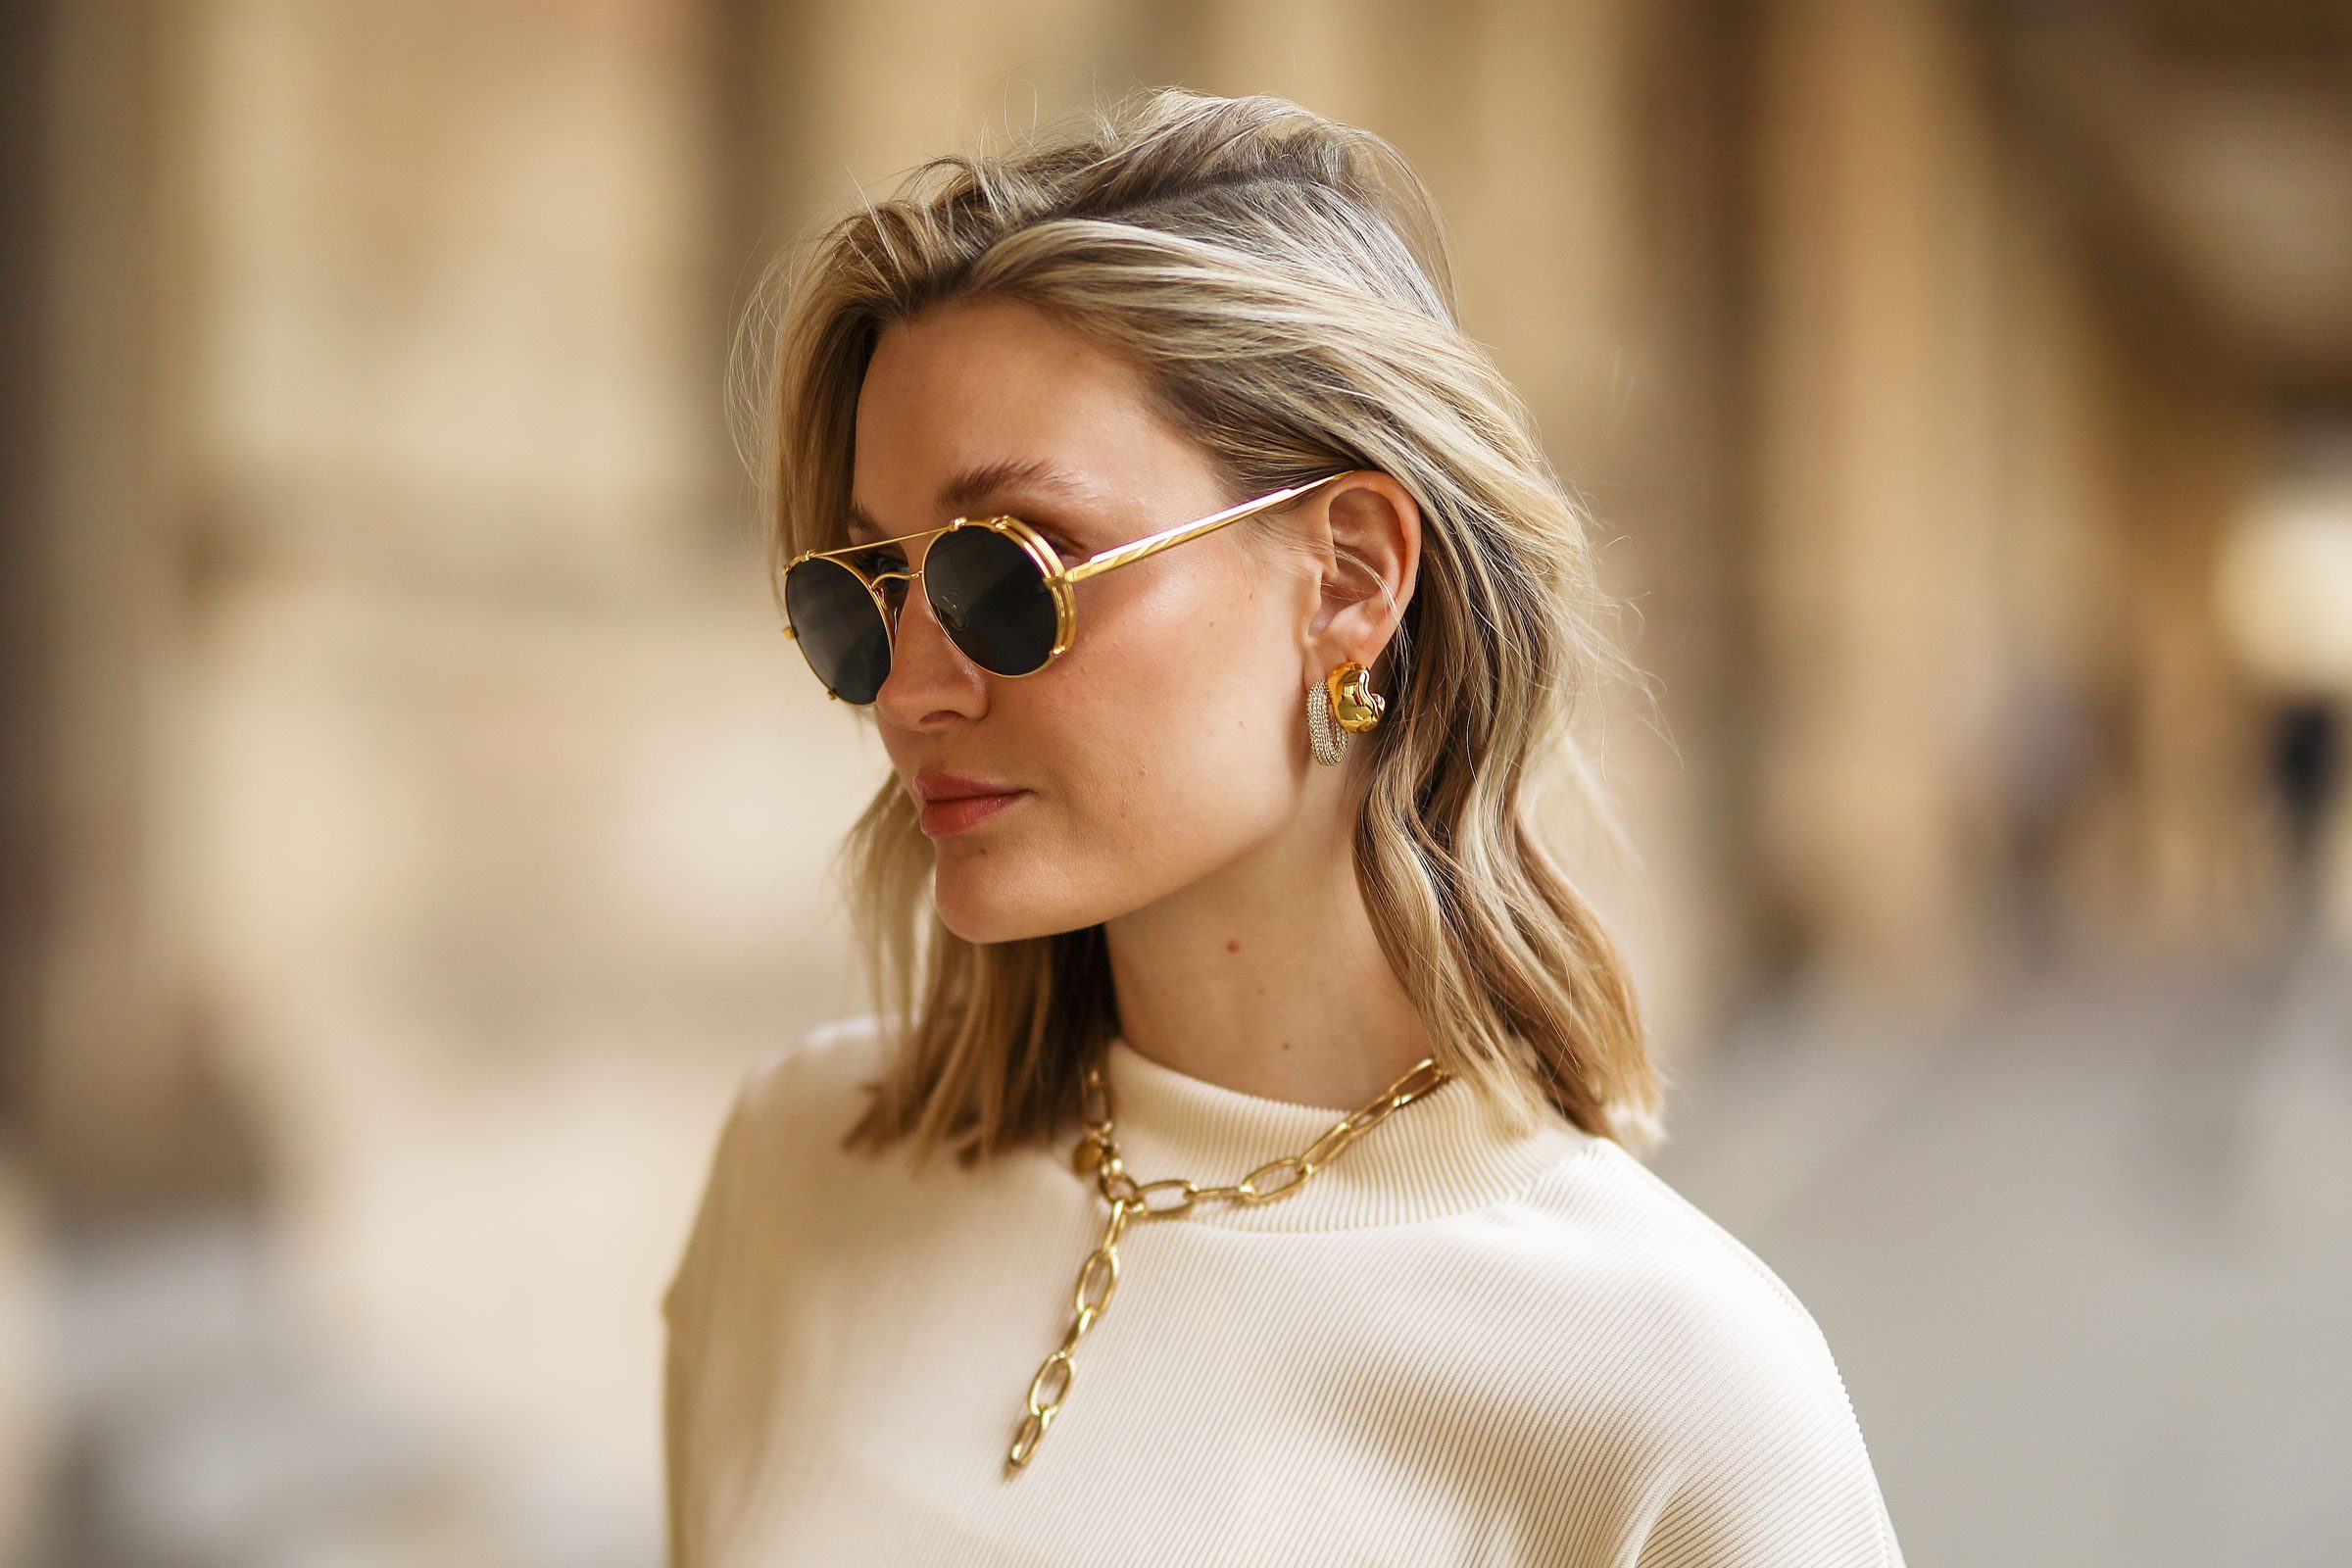 woman wearing gold earrings, necklace and glasses